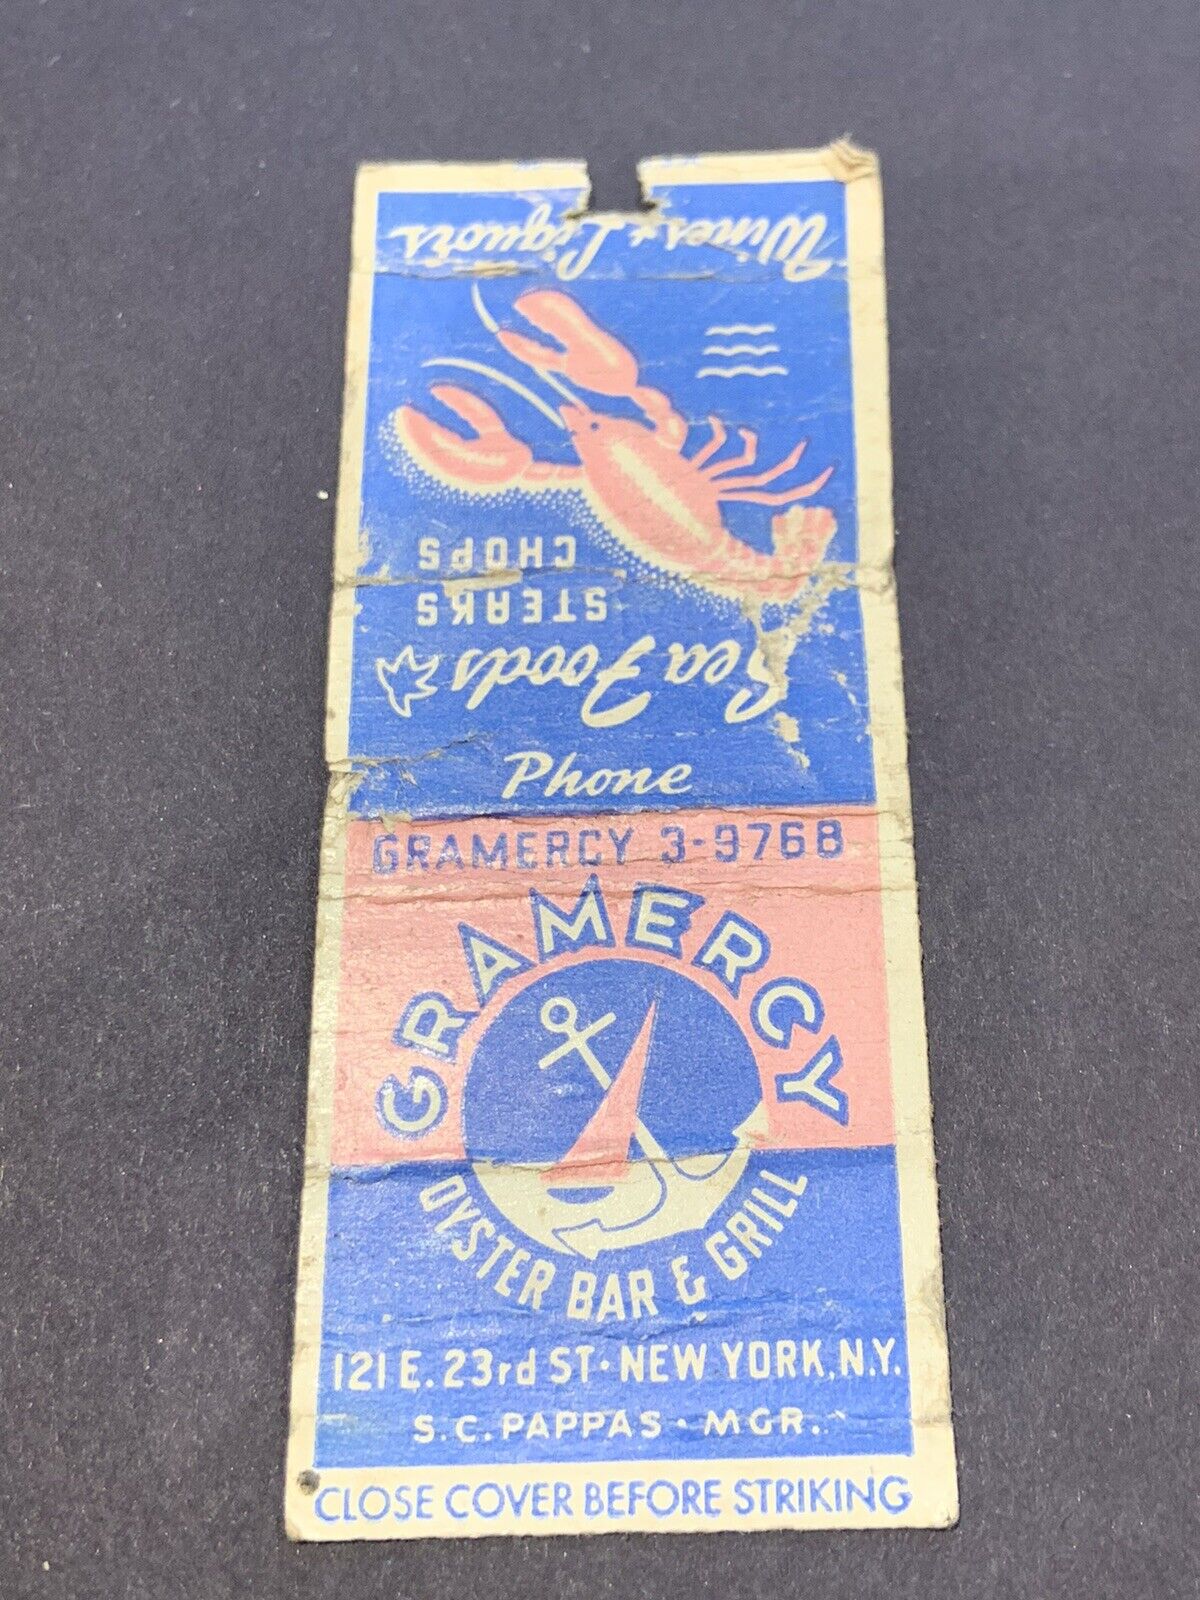 Vintage Bobtail Matchbook: “Gramercy Oyster Bar And Grill” New York, NY